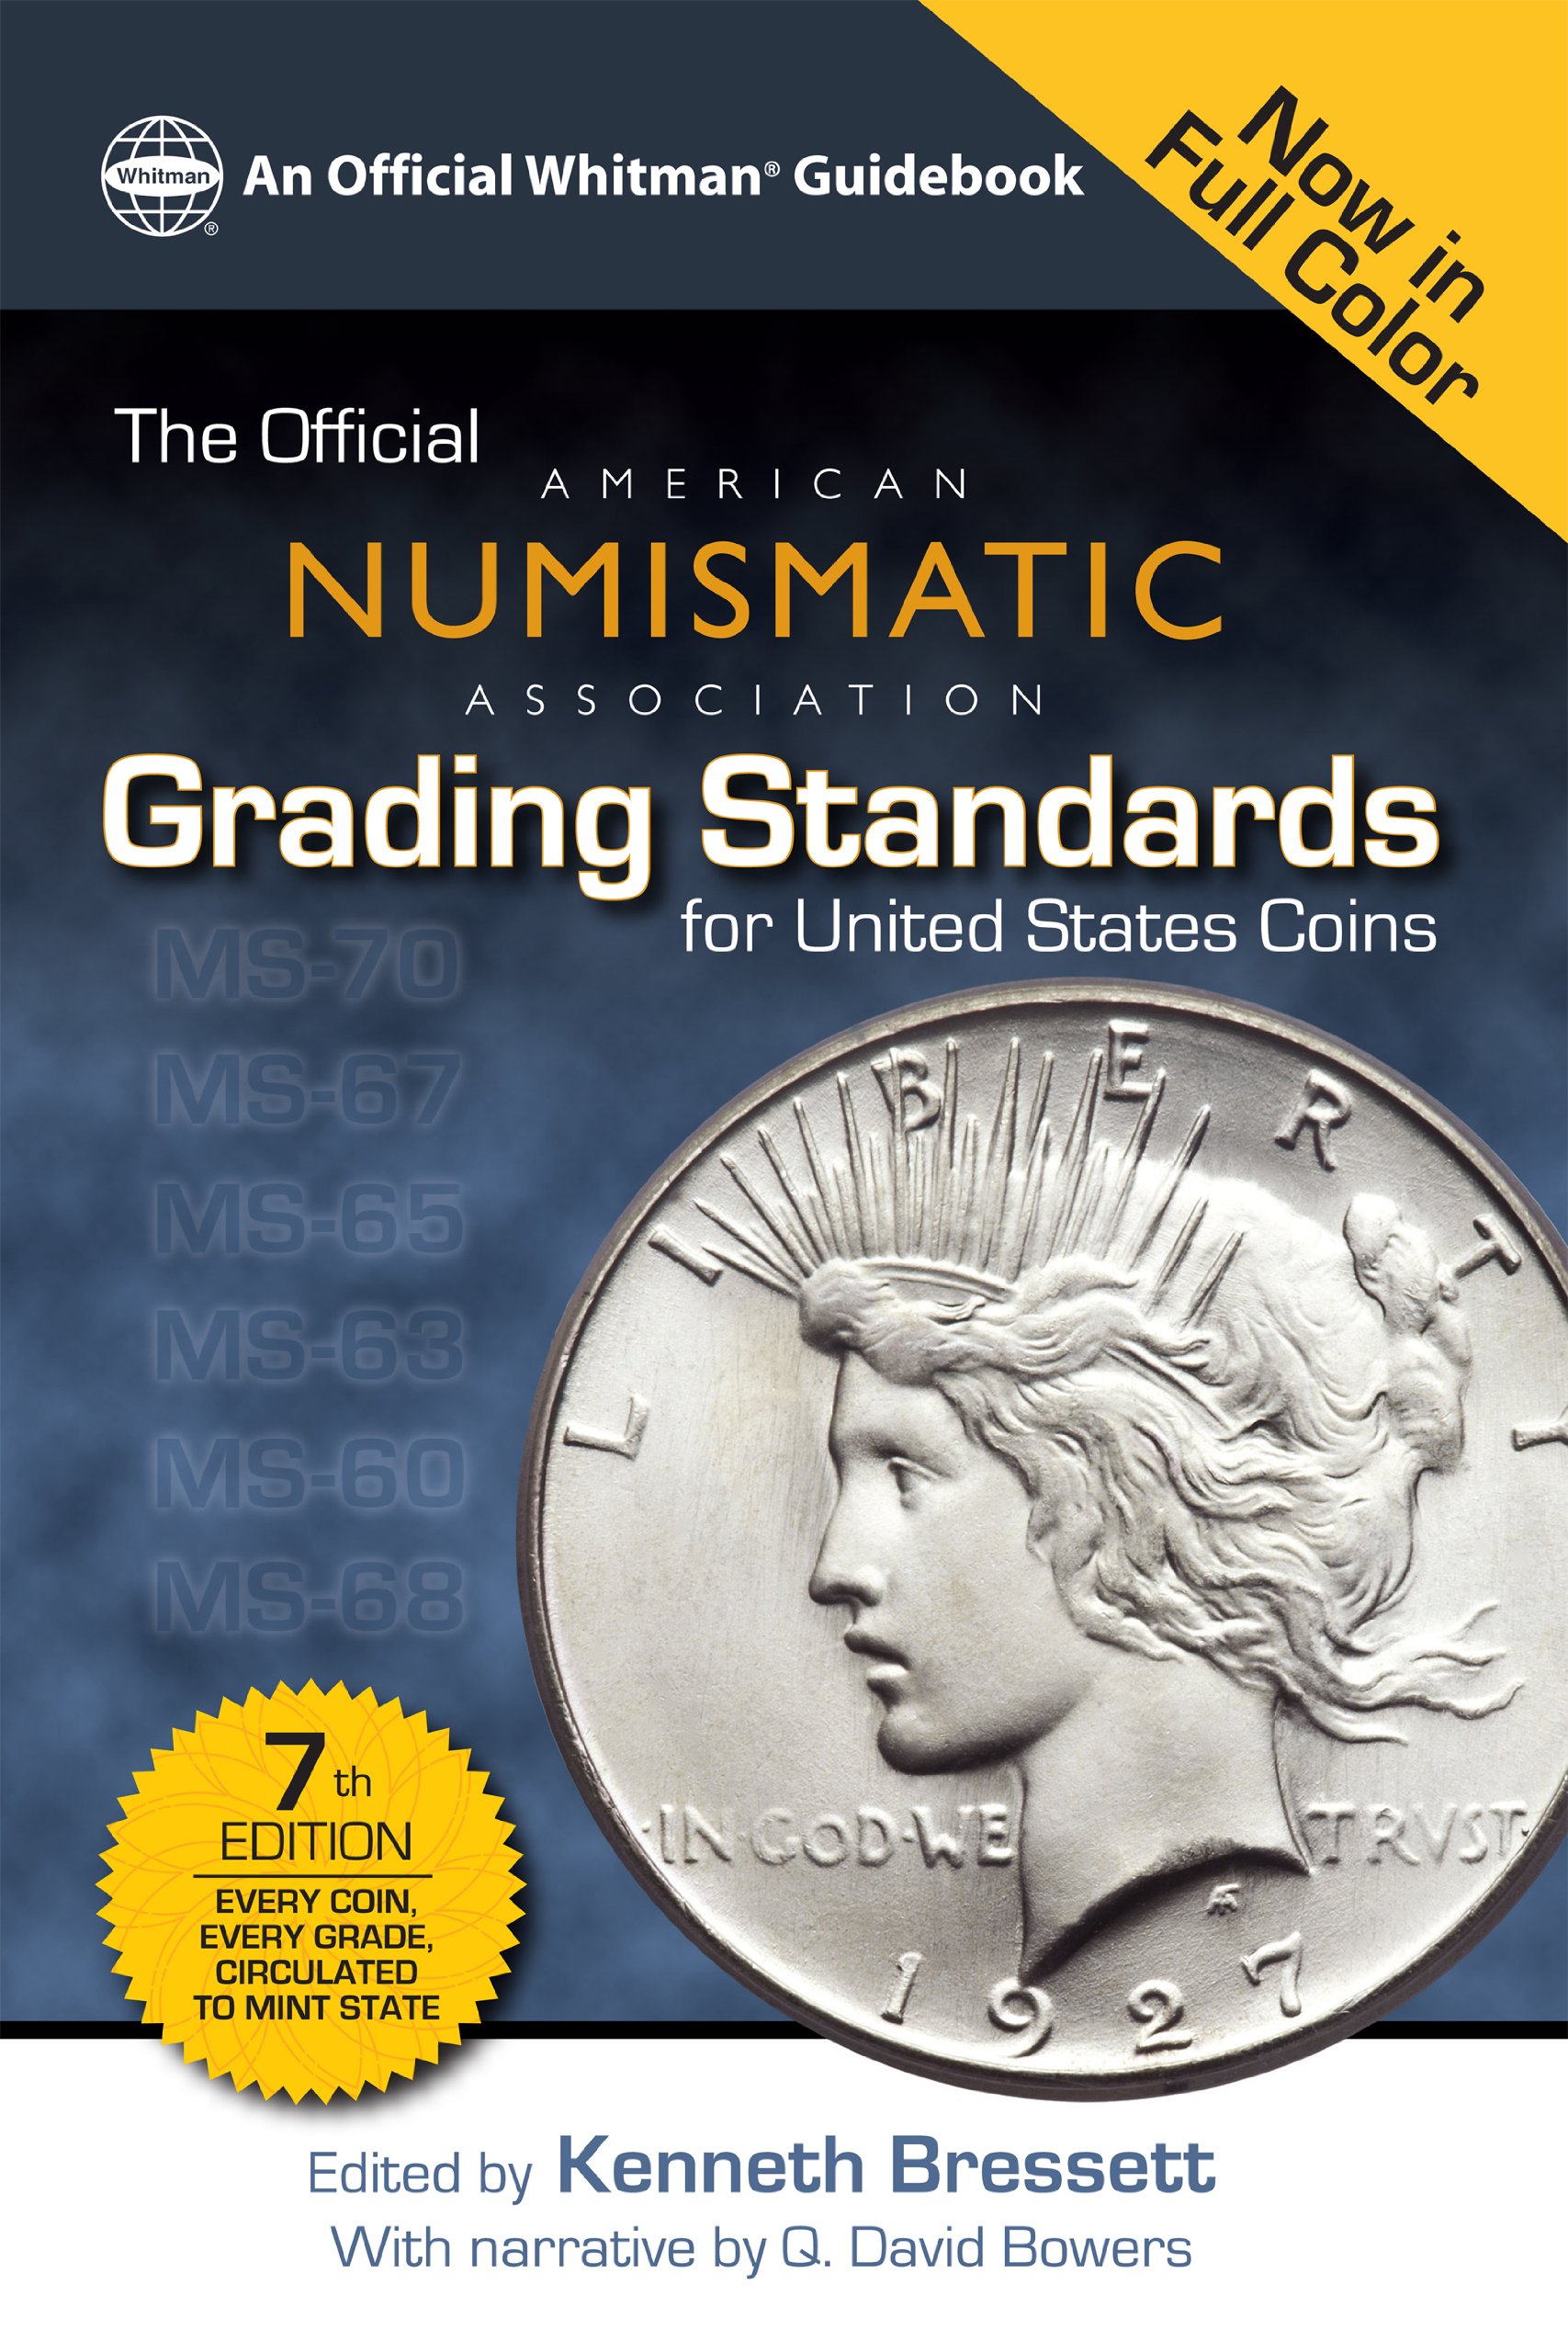 The Official American Numismatic Assiciation Grading Standards for United States Coins (Official Whitman Guidebook)